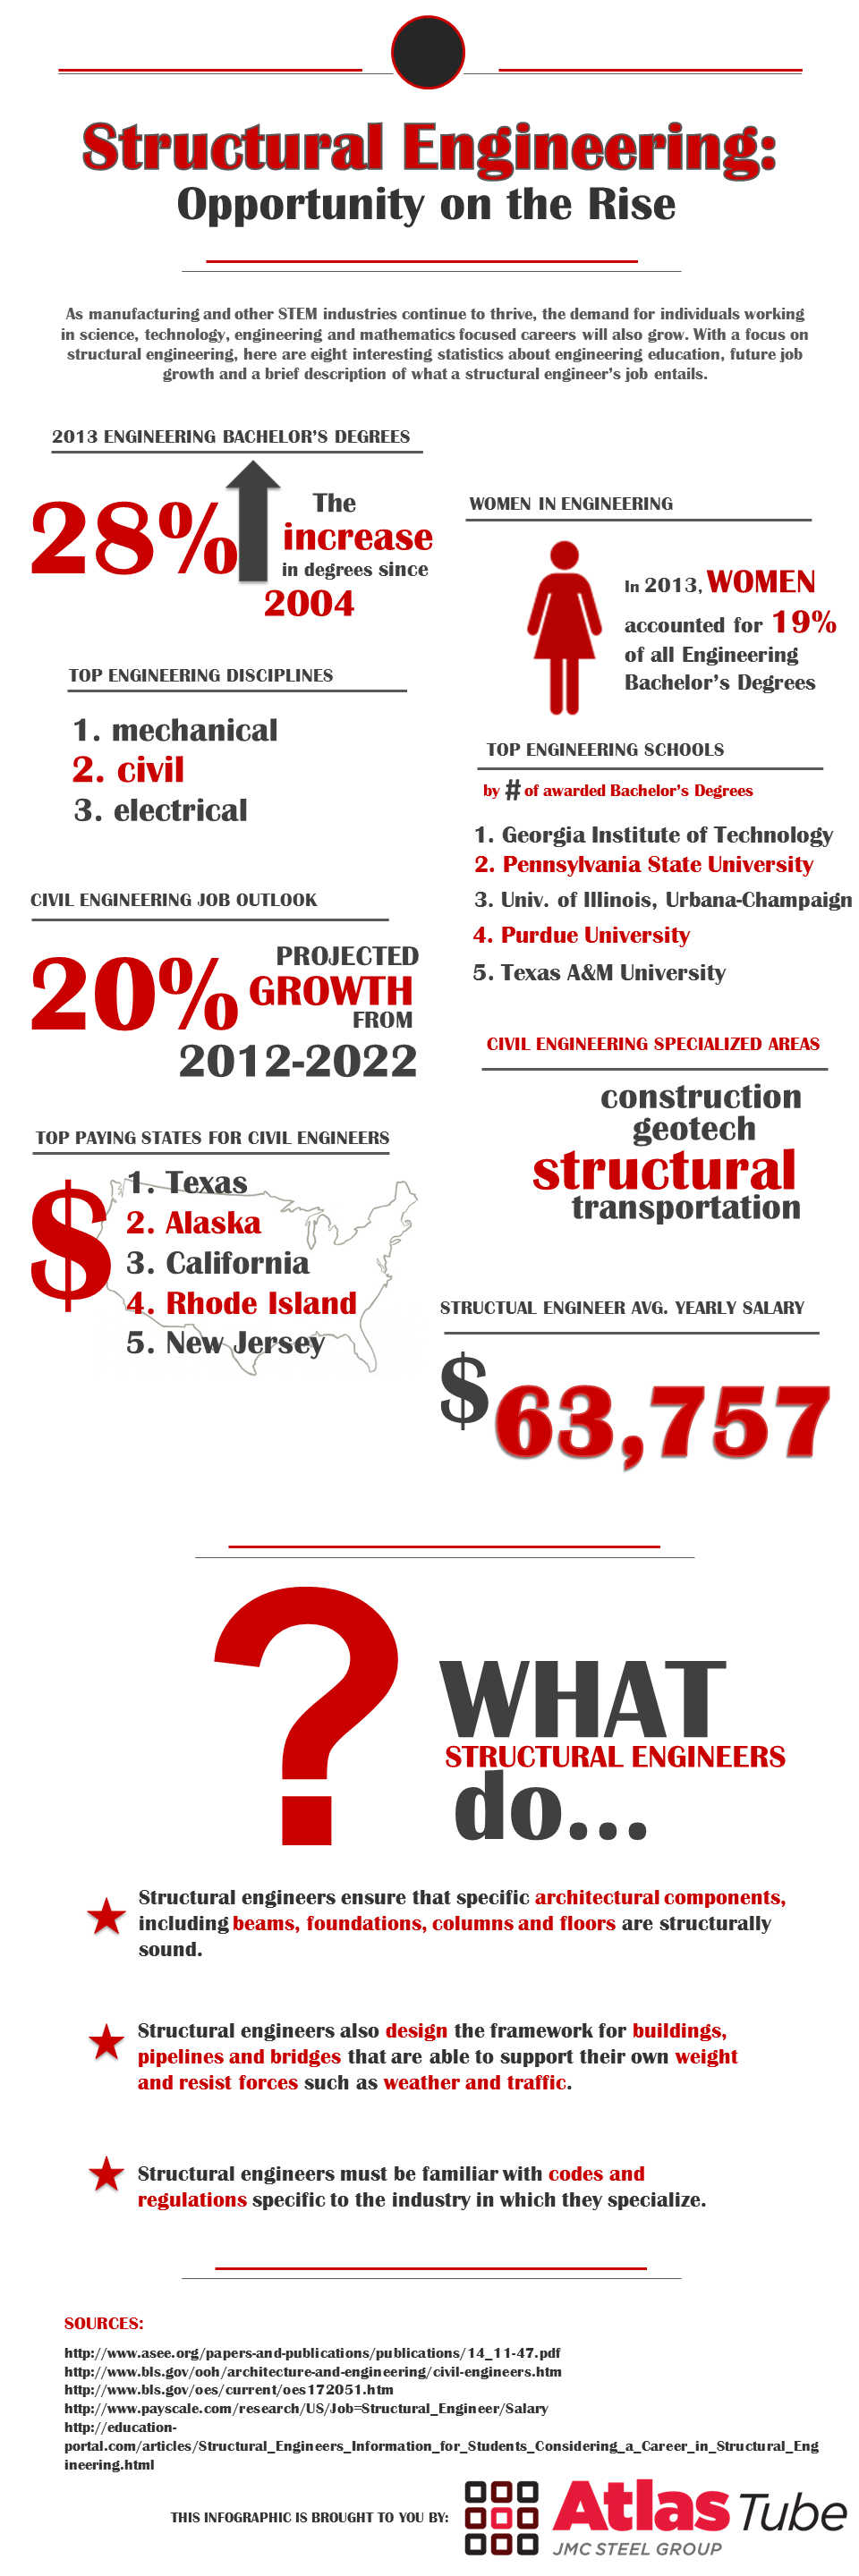 Structural Engineering Opportunity on the Rise INFOGRAPHIC